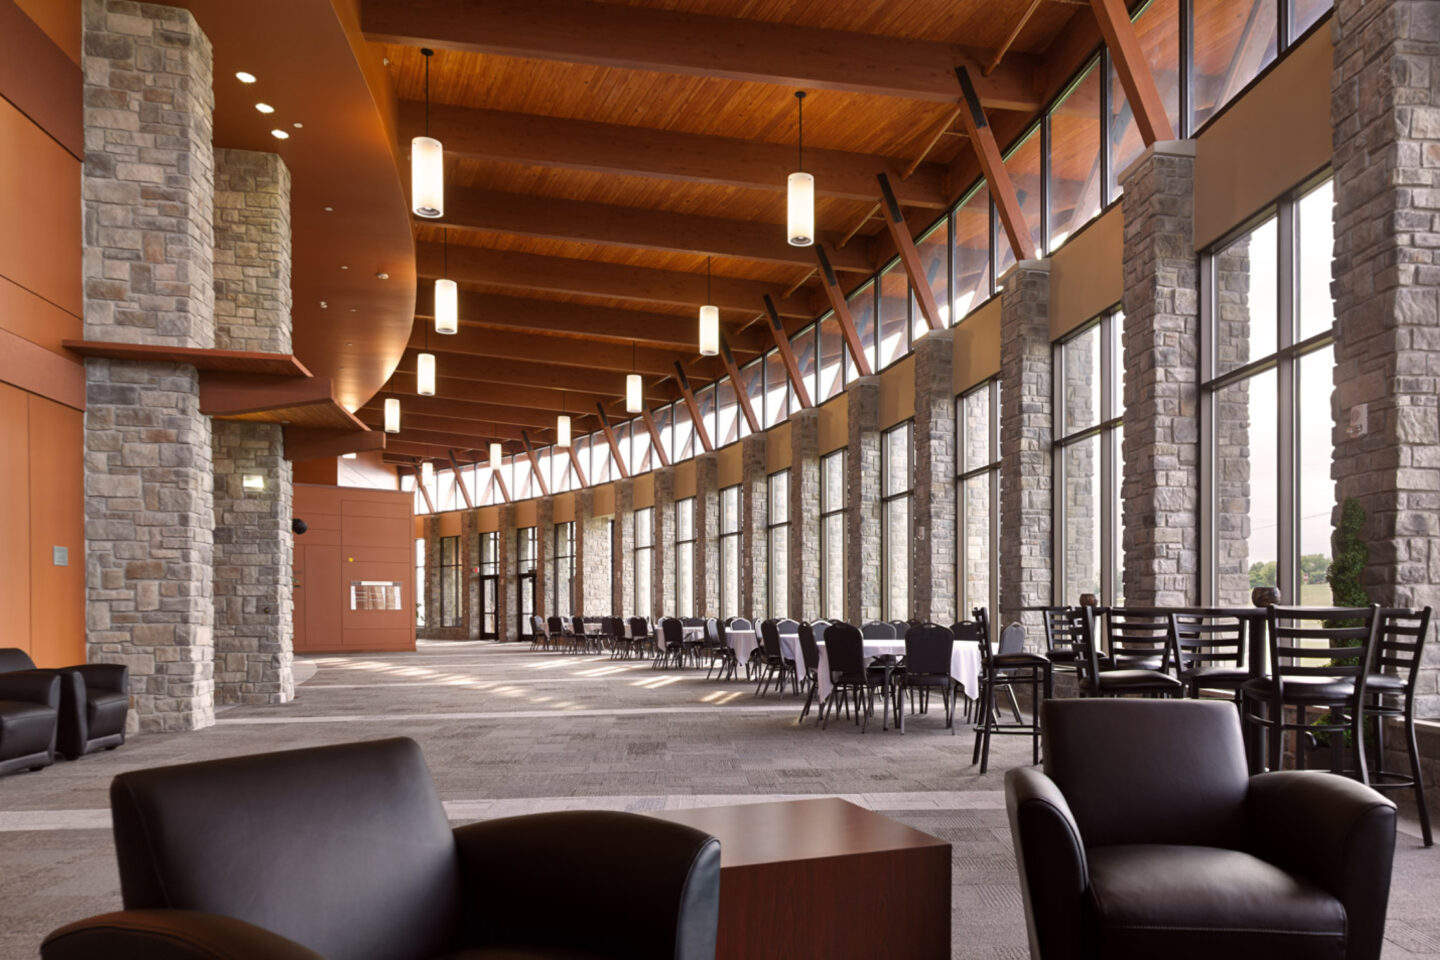 Silver Lake College Franciscan Center Lobby designed by Bray Architects